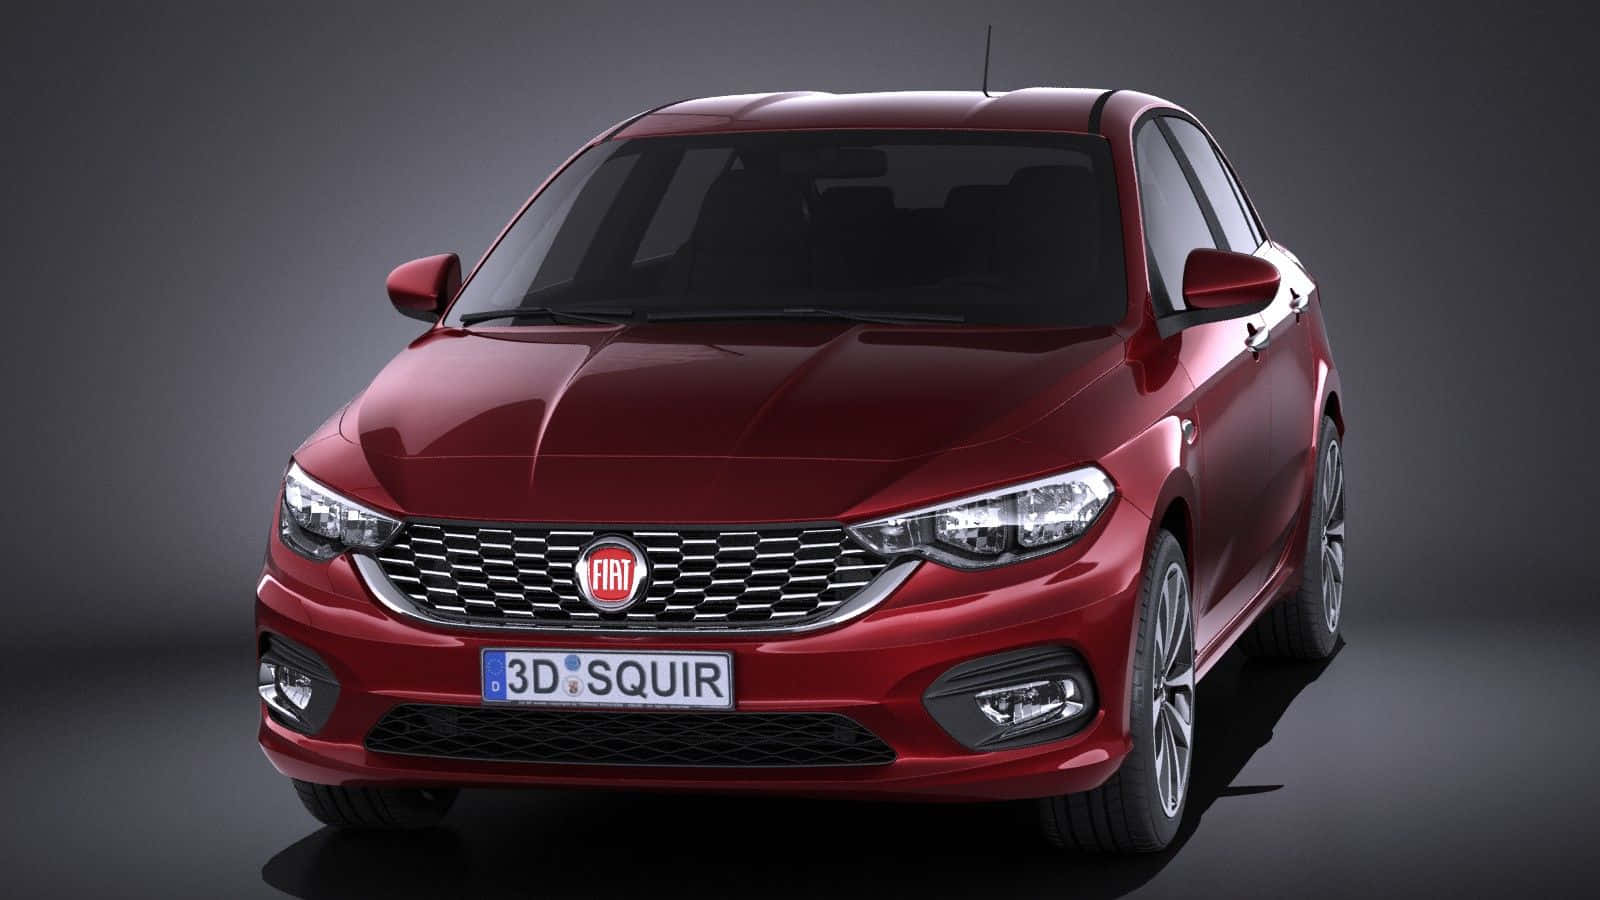 Sleek Fiat Tipo on the Road Wallpaper